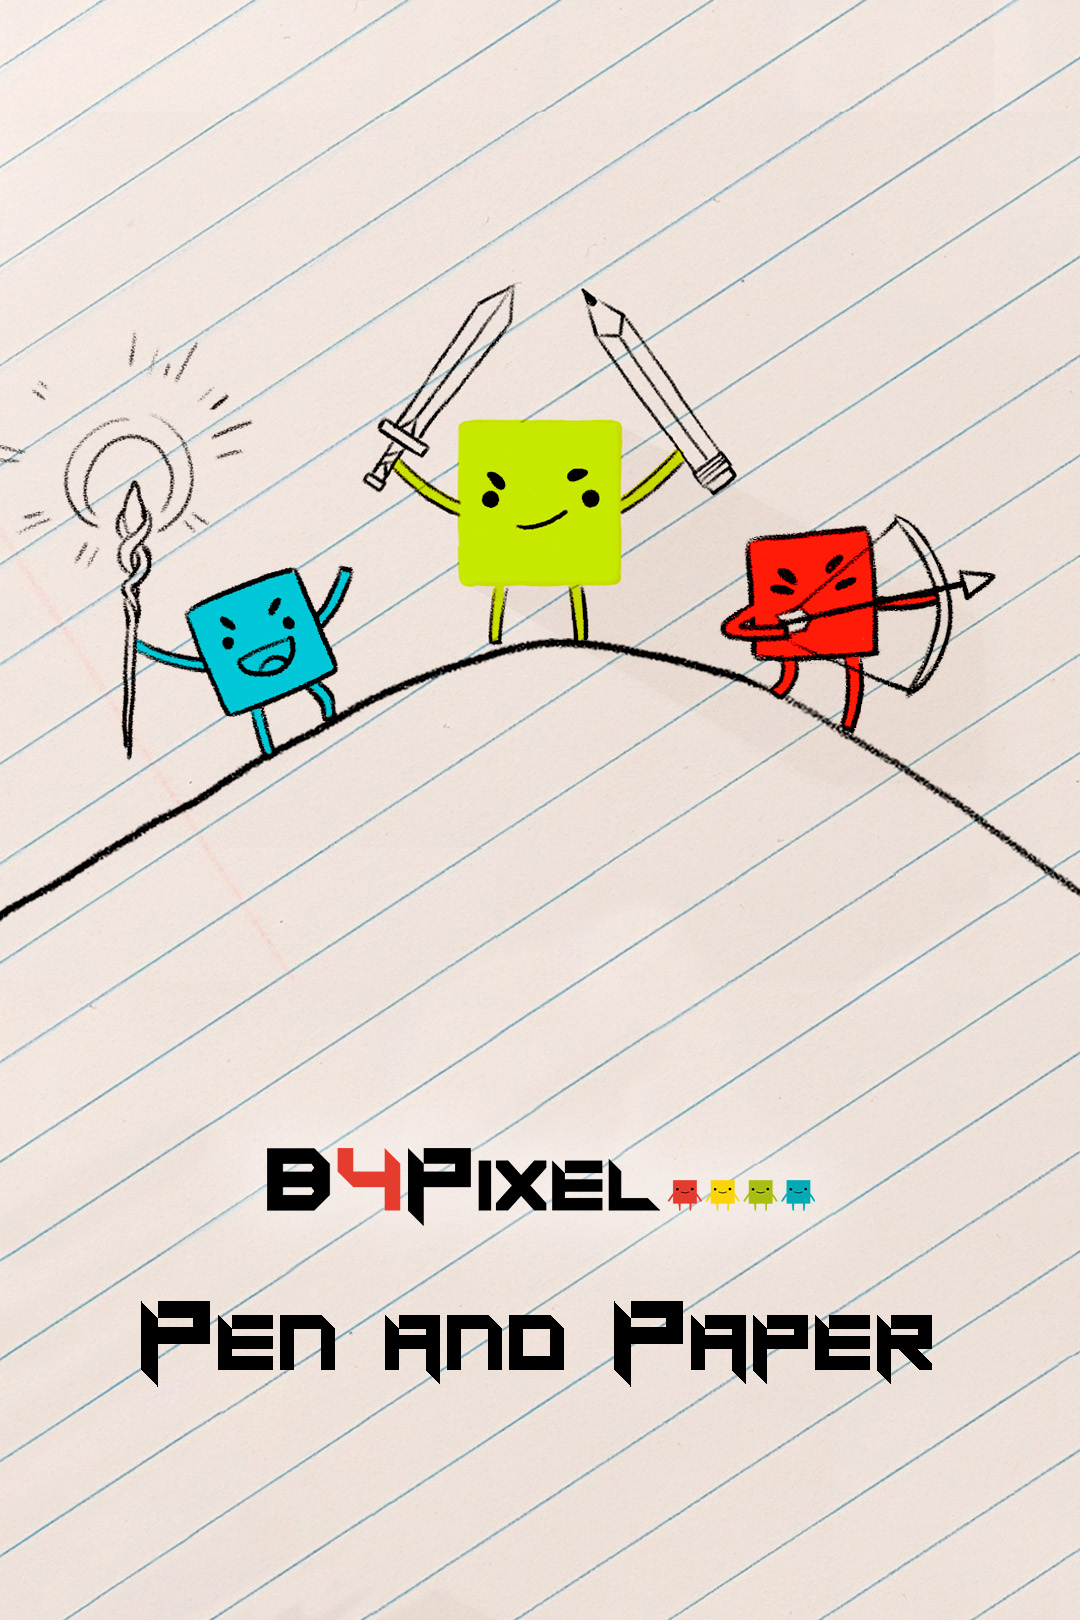 B4Pixel B4Pixel Pen and Paper 3x2 1 Shows und Formate